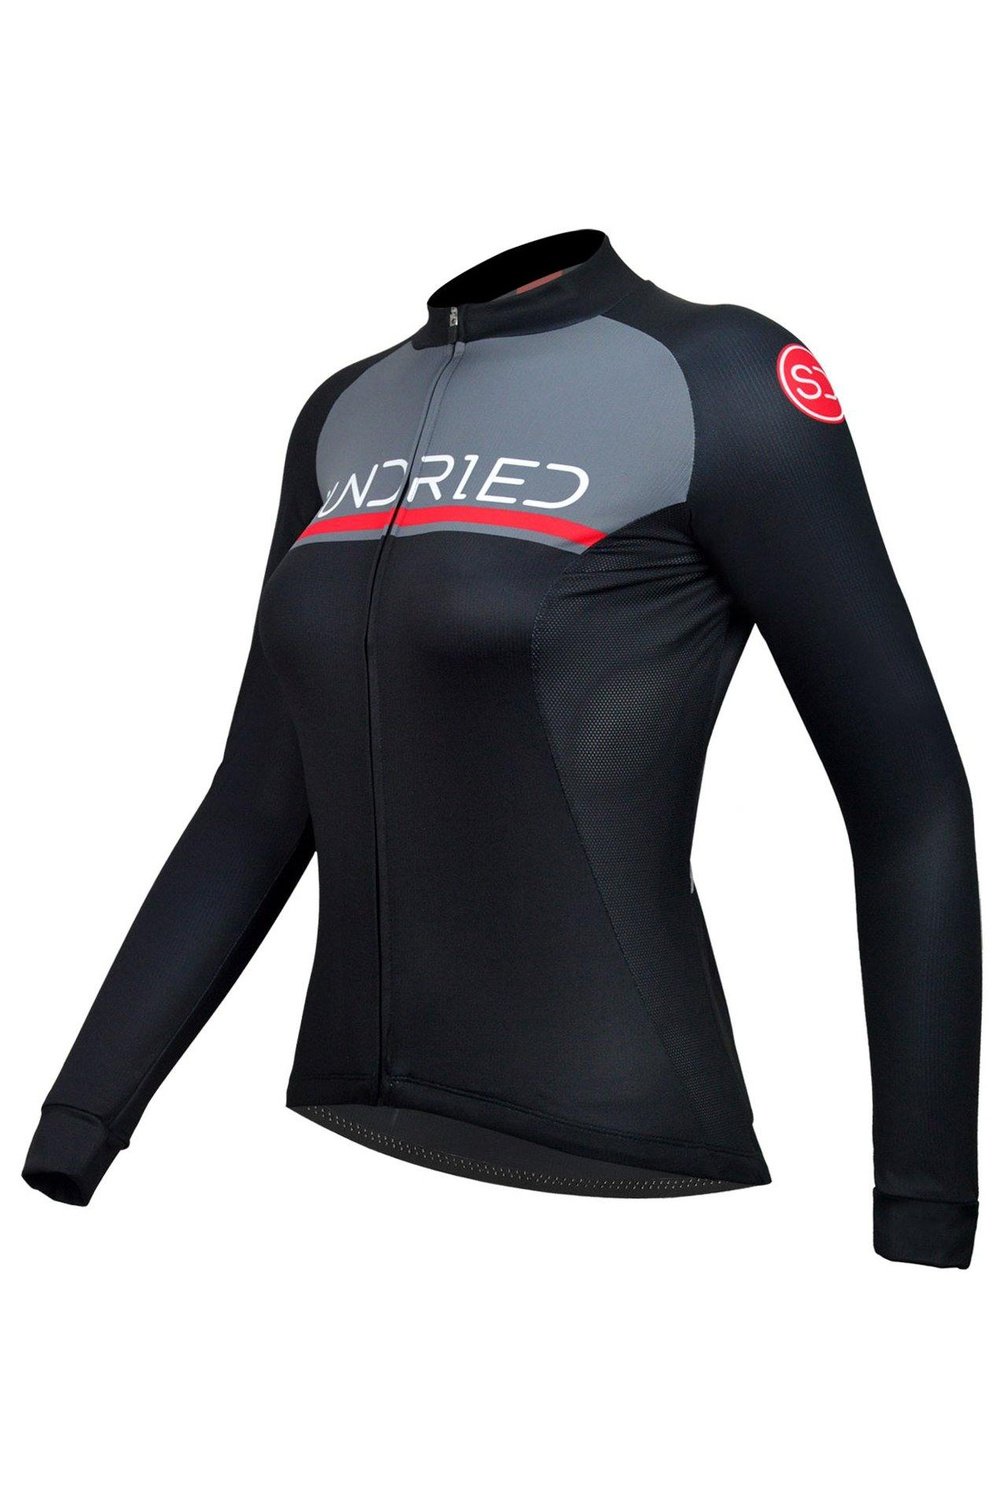 Sundried Rouleur Women's Long Sleeve Training Cycle Jersey Long Sleeve Jersey Activewear